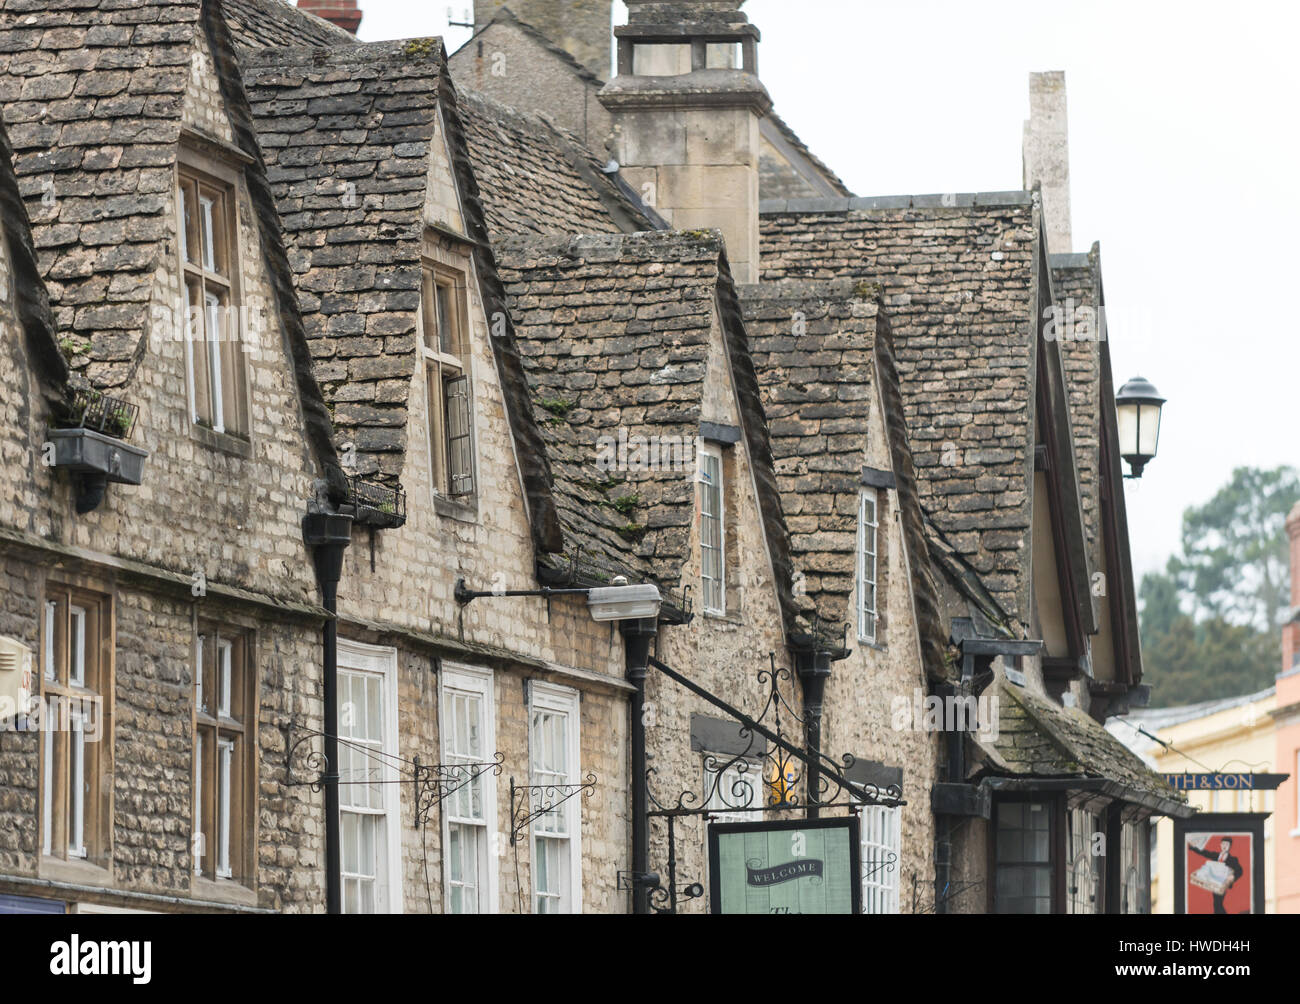 Building details of this historic Cotswolds market town on Castle Street, Cirencester in the Cotswolds, Gloucester, England, UK Stock Photo